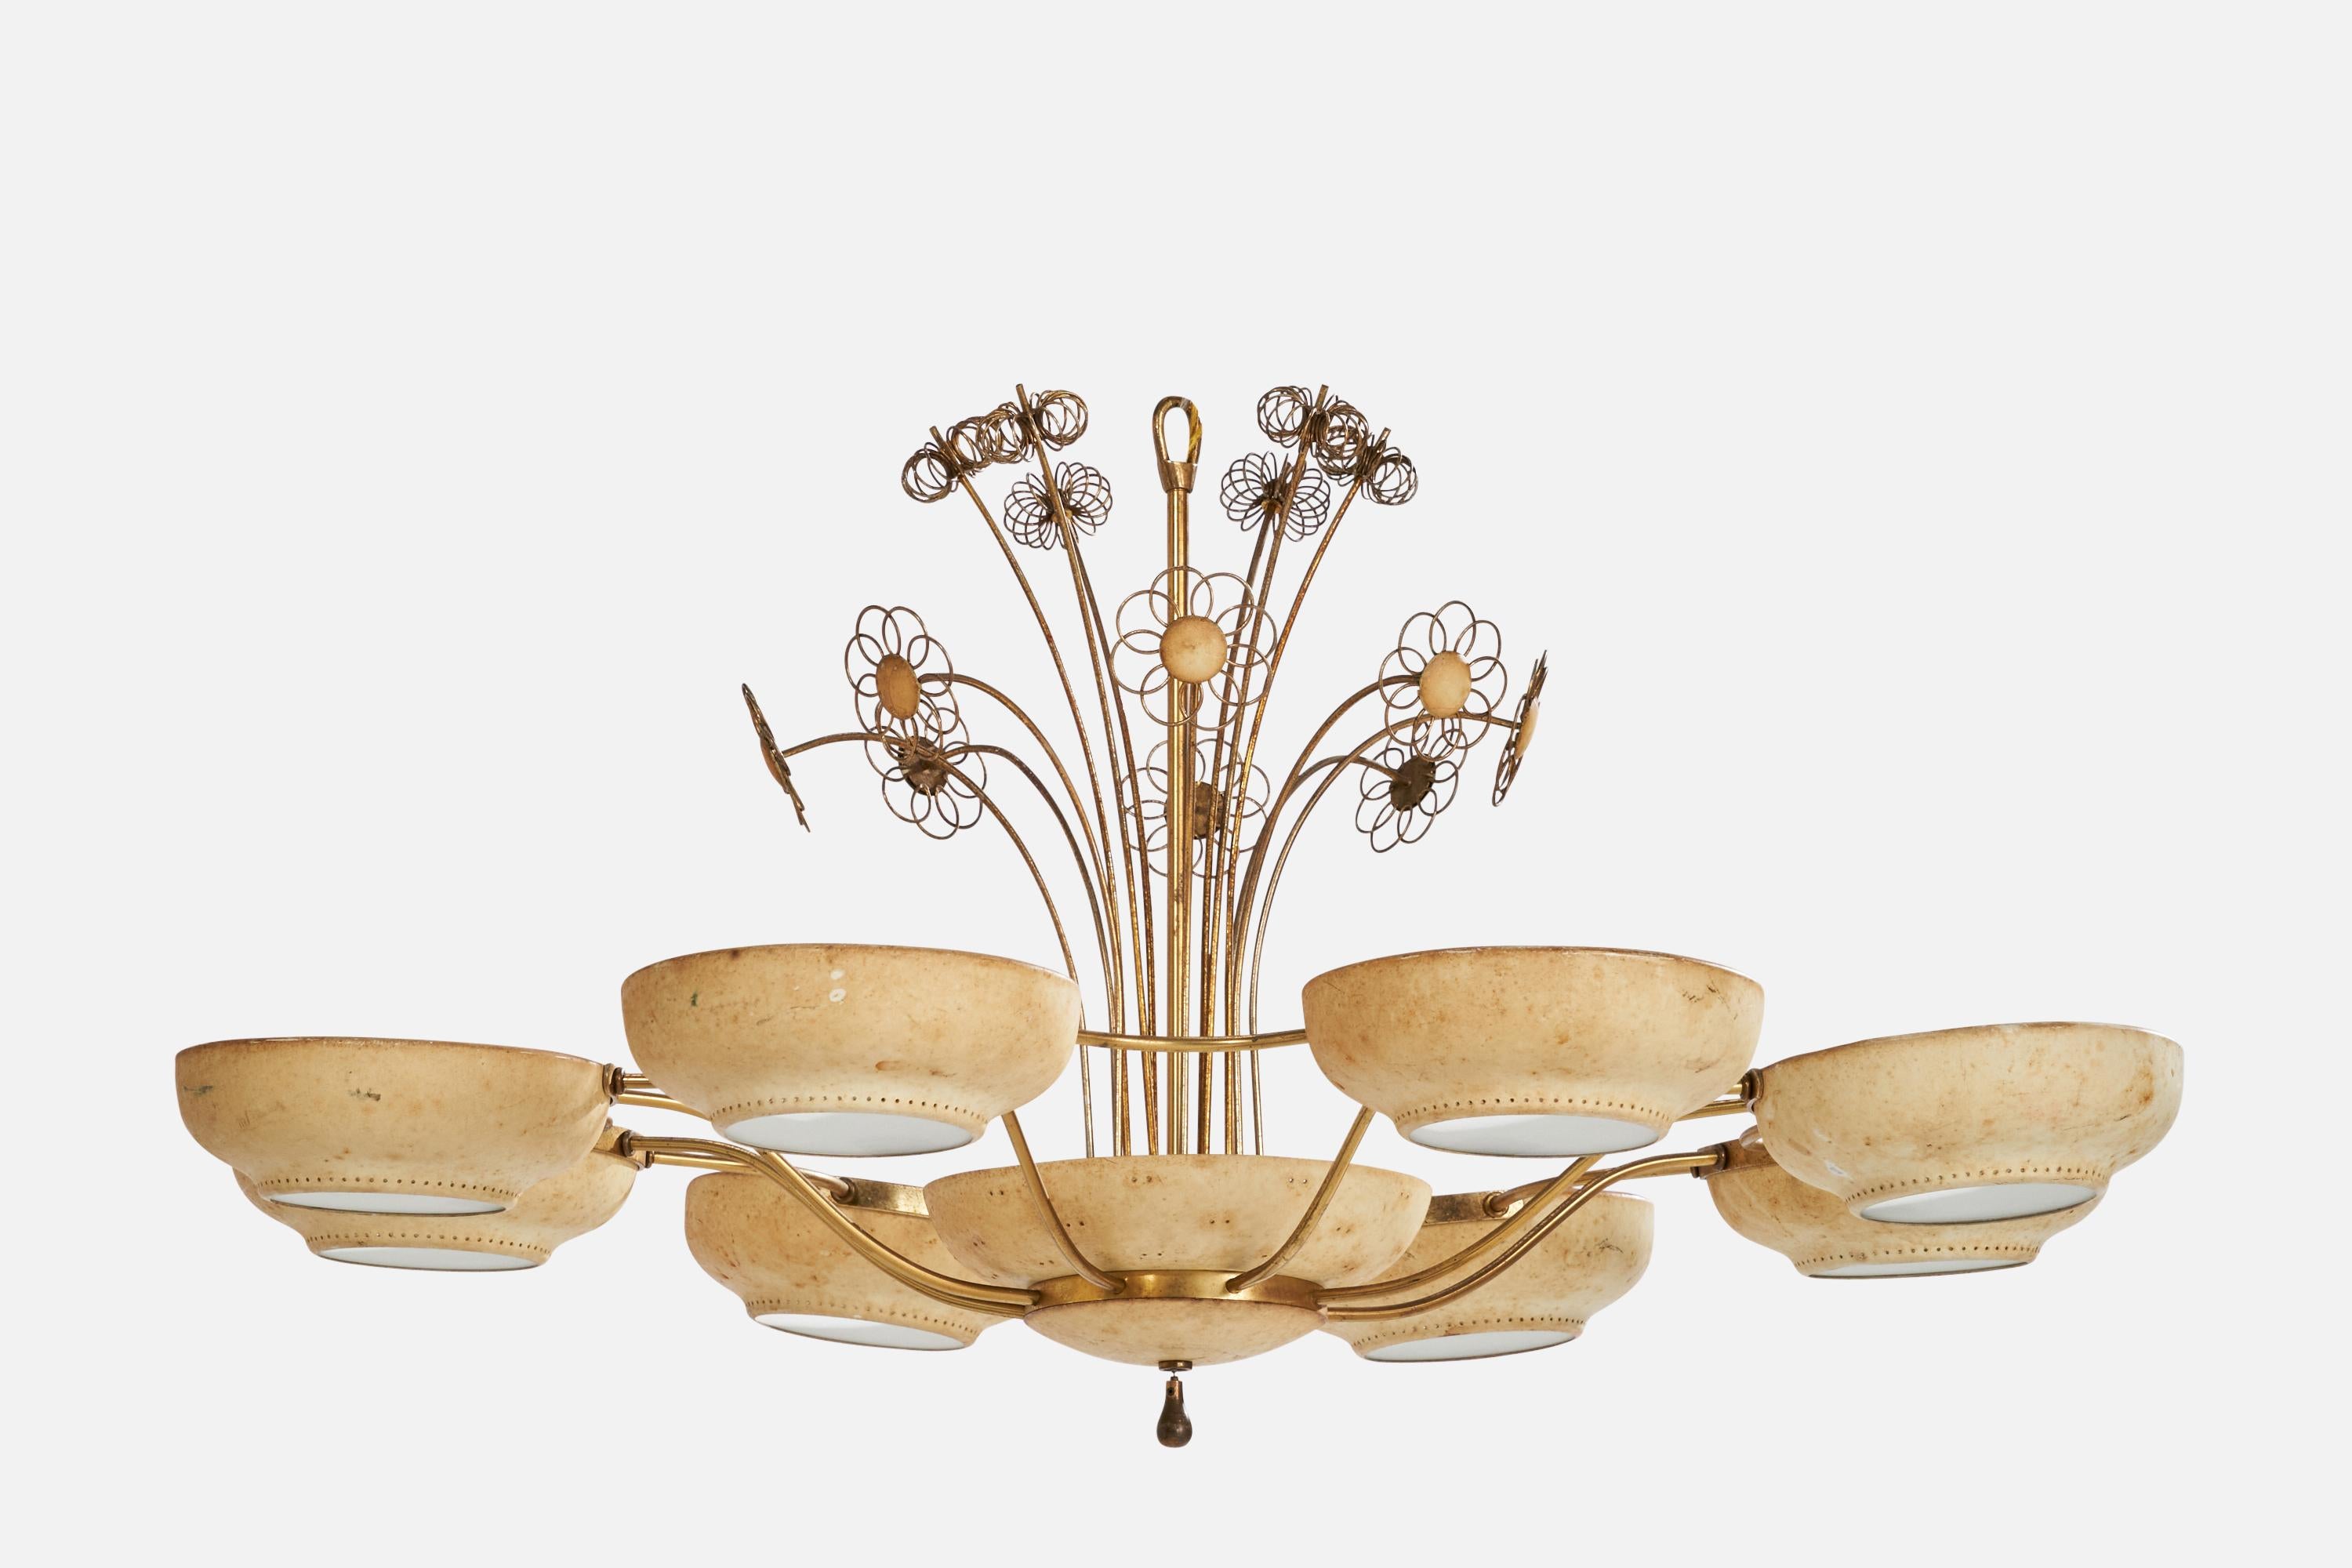 A brass and beige-lacquered metal and glass chandelier designed and produced by Lightolier, USA, 1950s.

Dimensions of canopy (inches): N/A
Socket takes standard E-26 & E-14 bulbs. 12 sockets.There is no maximum wattage stated on the fixture. All